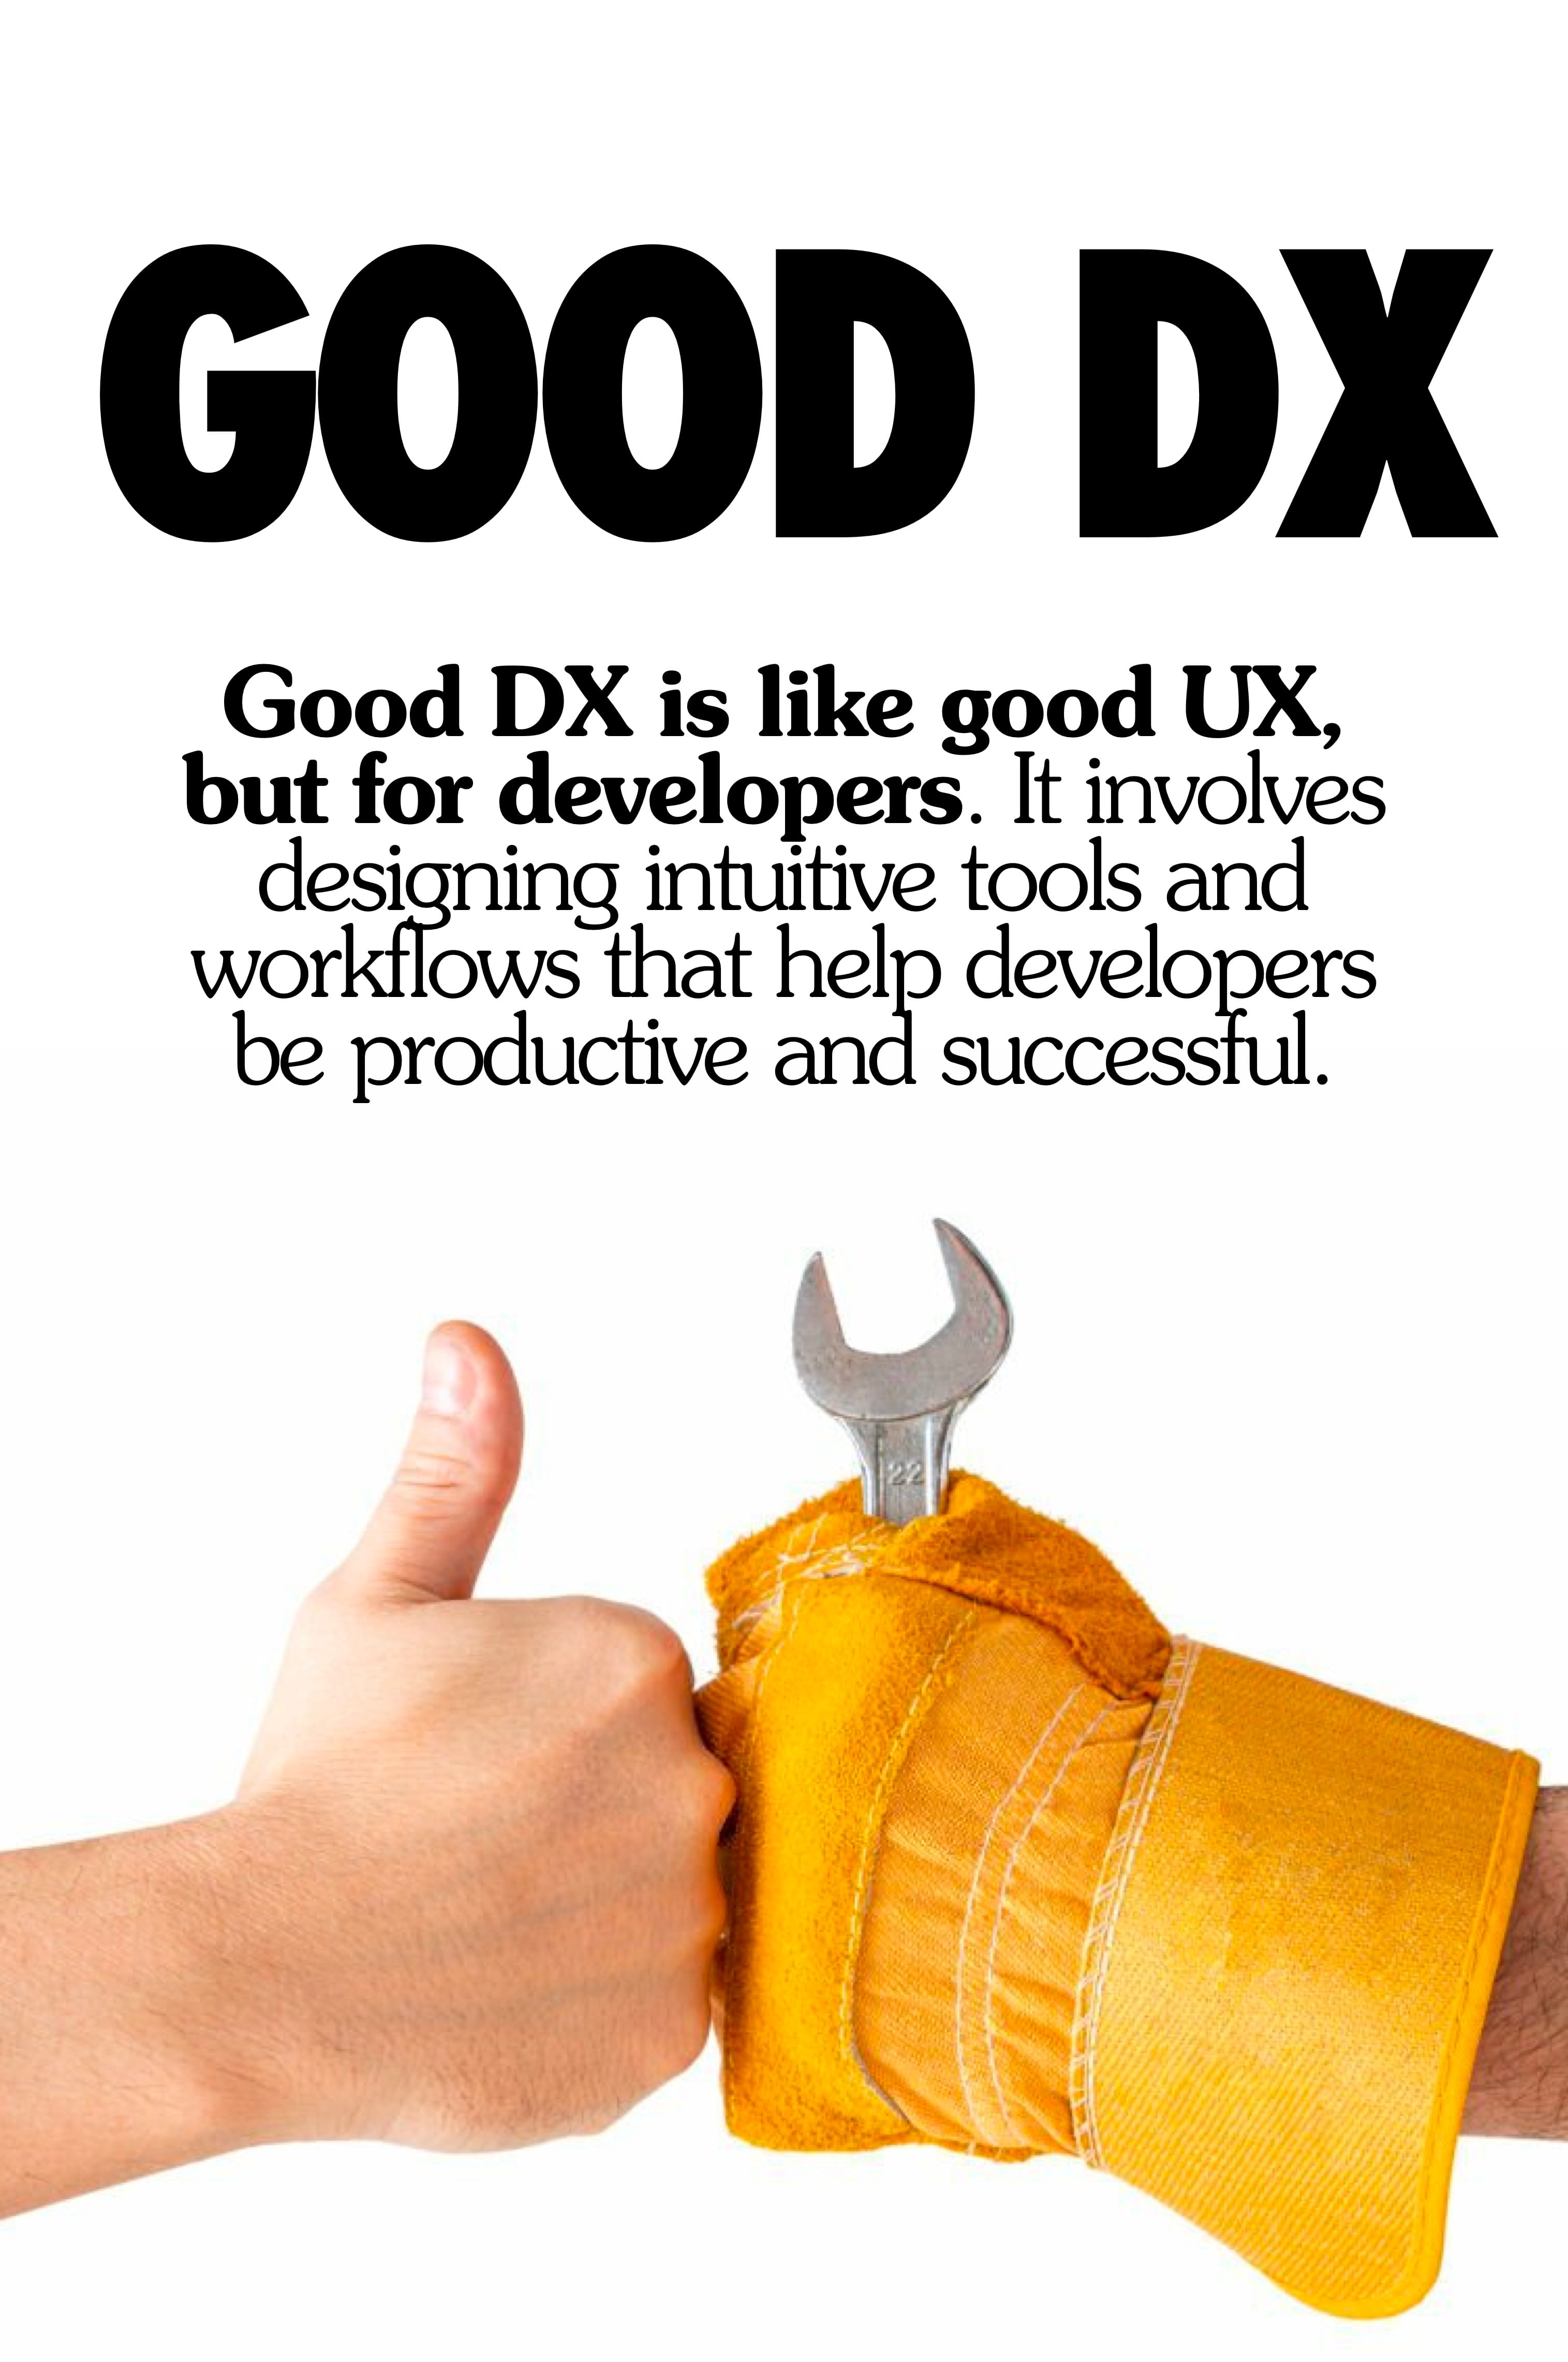 Good DX is like good UX, but for developers. It involves designing intuitive tools and workflows that help developers be productive and successful.